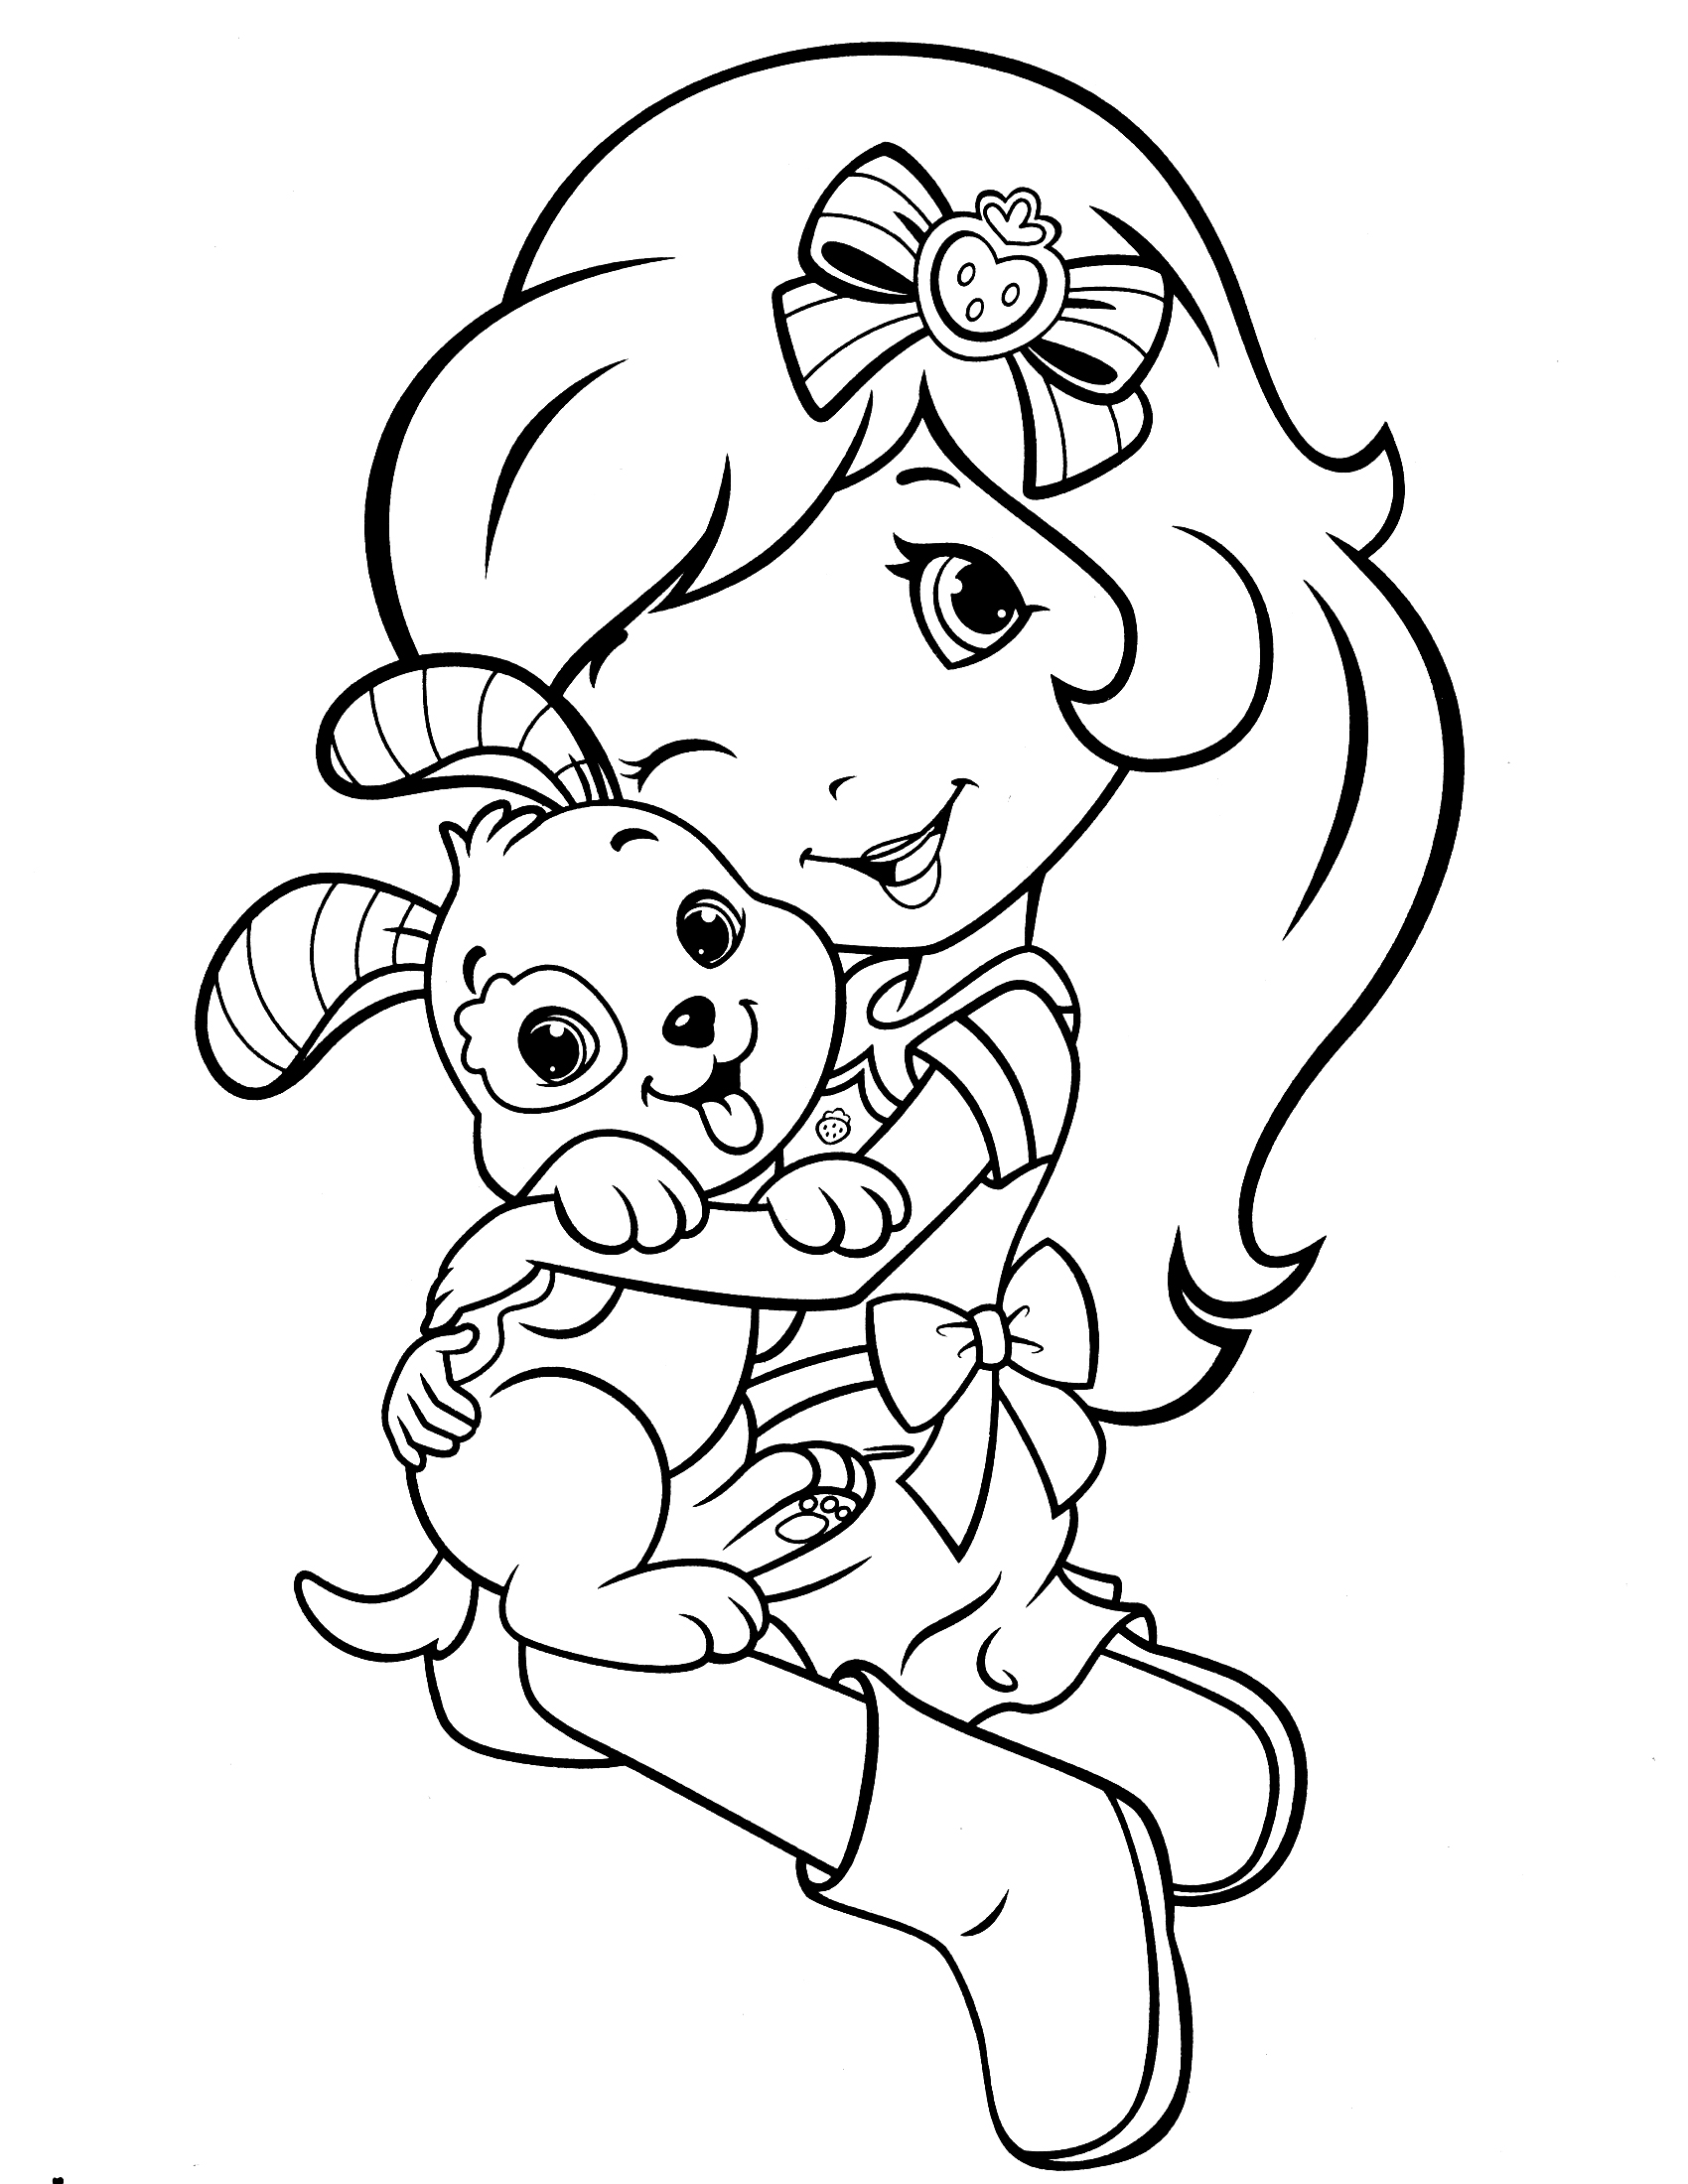 Strawberry Shortcake Coloring Pages \/ Cool coloring pages \/ 25 Free Printable Coloring Pages For 